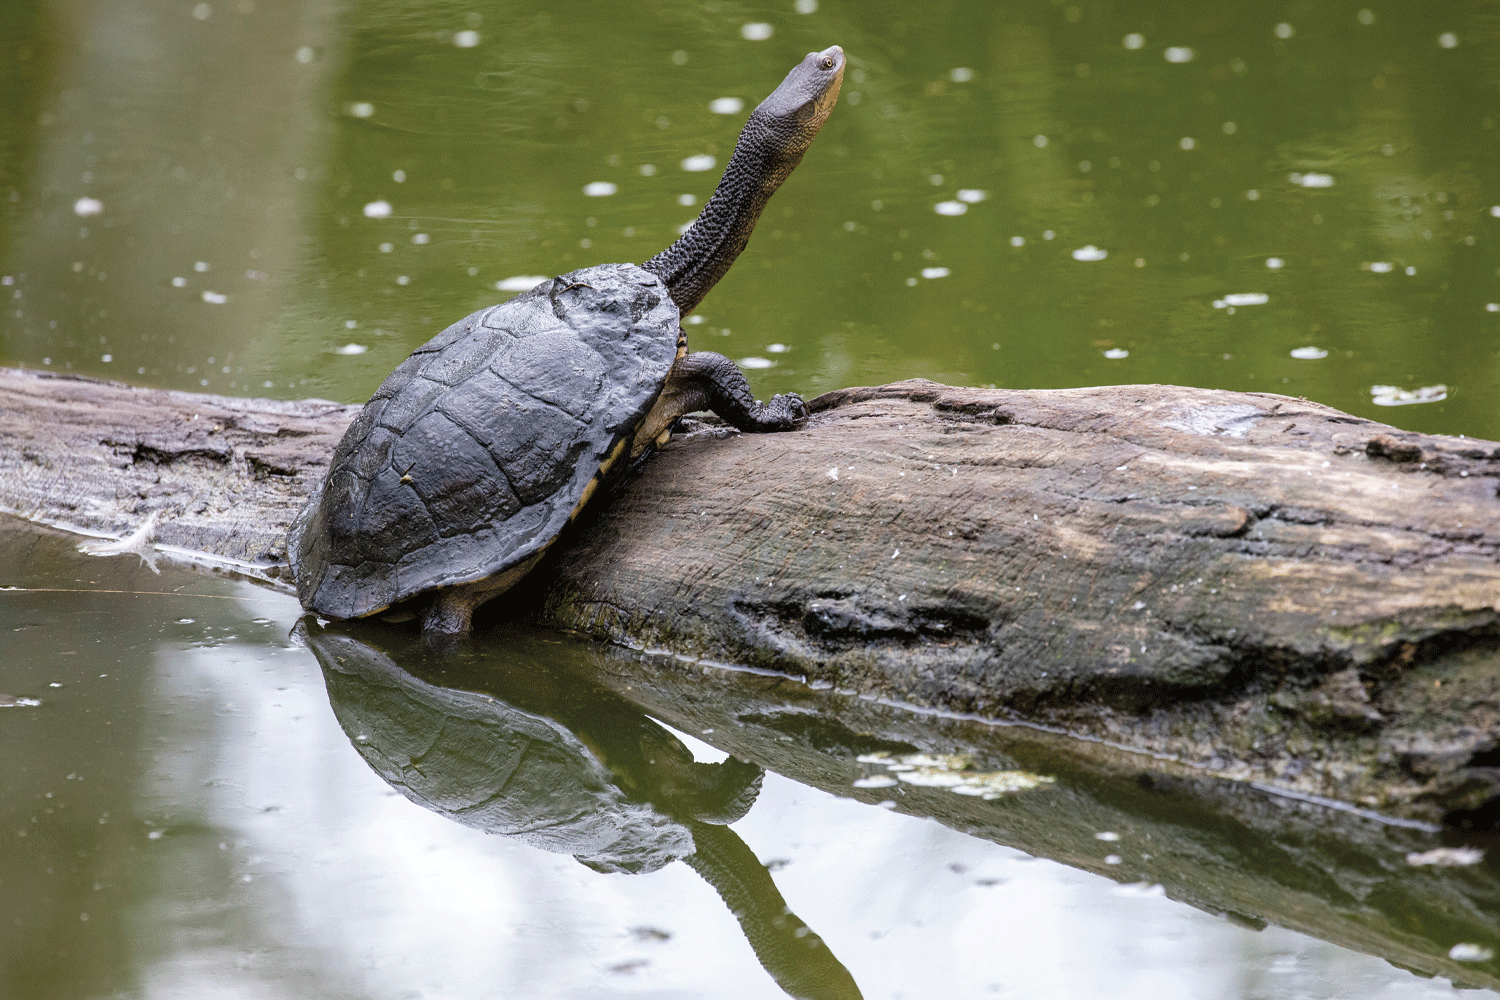 This is a close-up photograph of a long-necked turtle basking on a log that is floating in water. The turtle is dark brown in colour and has a hard, oval shell. The reflection of the turtle can also been seen in the water.